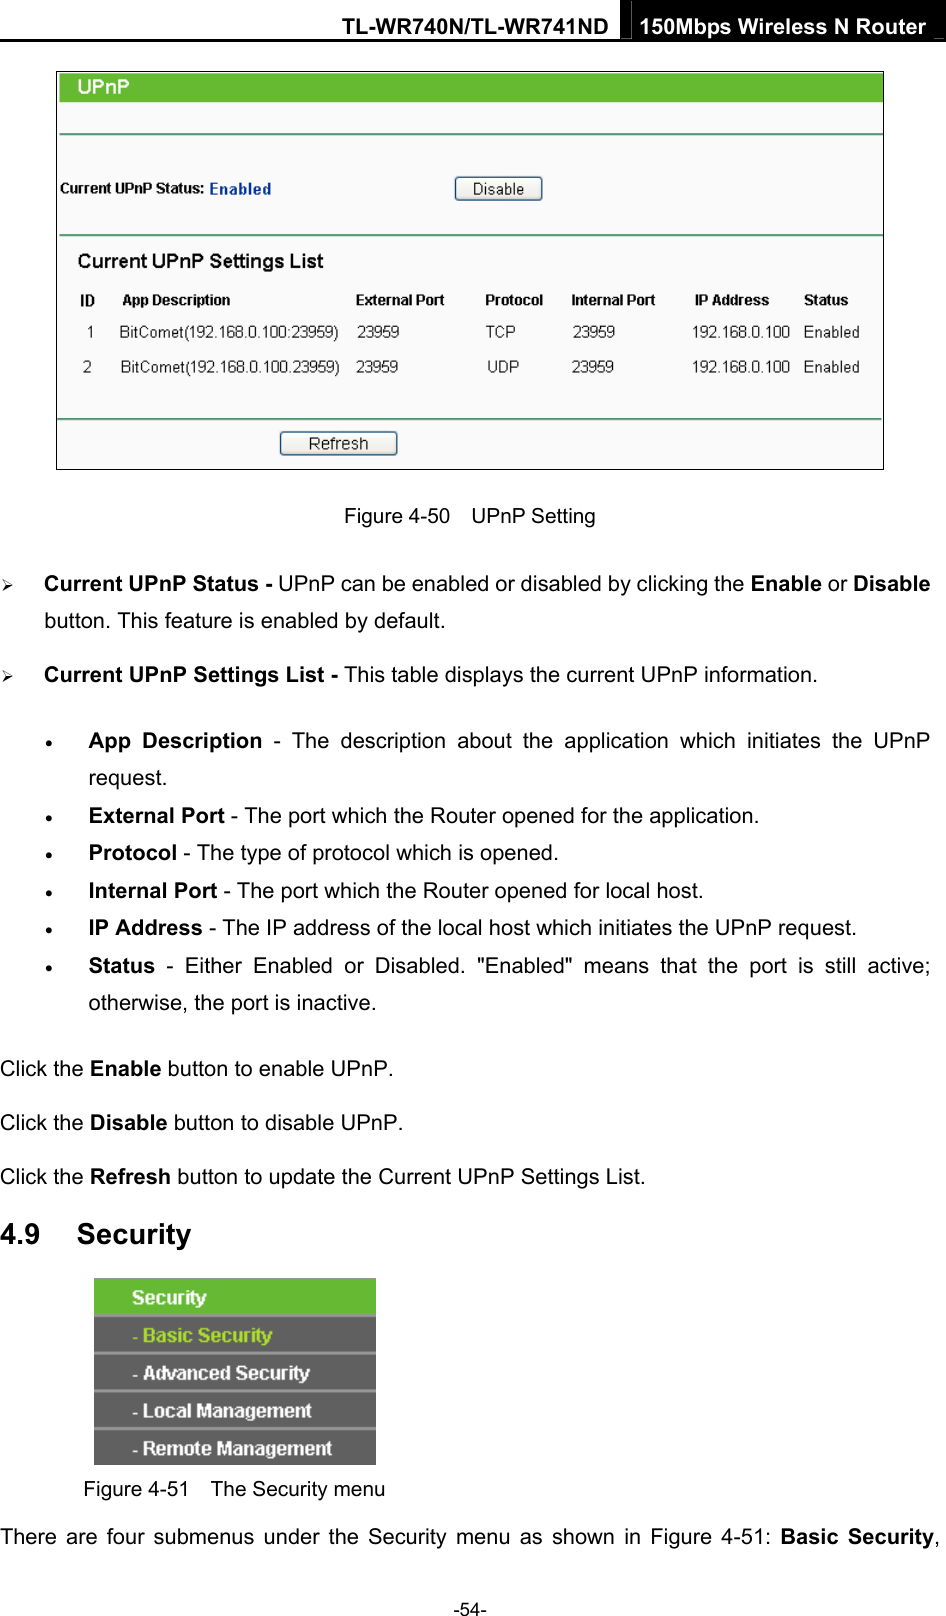 TL-WR740N/TL-WR741ND 150Mbps Wireless N Router  -54-  Figure 4-50  UPnP Setting ¾ Current UPnP Status - UPnP can be enabled or disabled by clicking the Enable or Disable button. This feature is enabled by default. ¾ Current UPnP Settings List - This table displays the current UPnP information. • App Description - The description about the application which initiates the UPnP request.  • External Port - The port which the Router opened for the application.   • Protocol - The type of protocol which is opened.   • Internal Port - The port which the Router opened for local host.   • IP Address - The IP address of the local host which initiates the UPnP request.   • Status - Either Enabled or Disabled. &quot;Enabled&quot; means that the port is still active; otherwise, the port is inactive.   Click the Enable button to enable UPnP. Click the Disable button to disable UPnP. Click the Refresh button to update the Current UPnP Settings List. 4.9  Security  Figure 4-51    The Security menu There are four submenus under the Security menu as shown in Figure 4-51: Basic Security, 